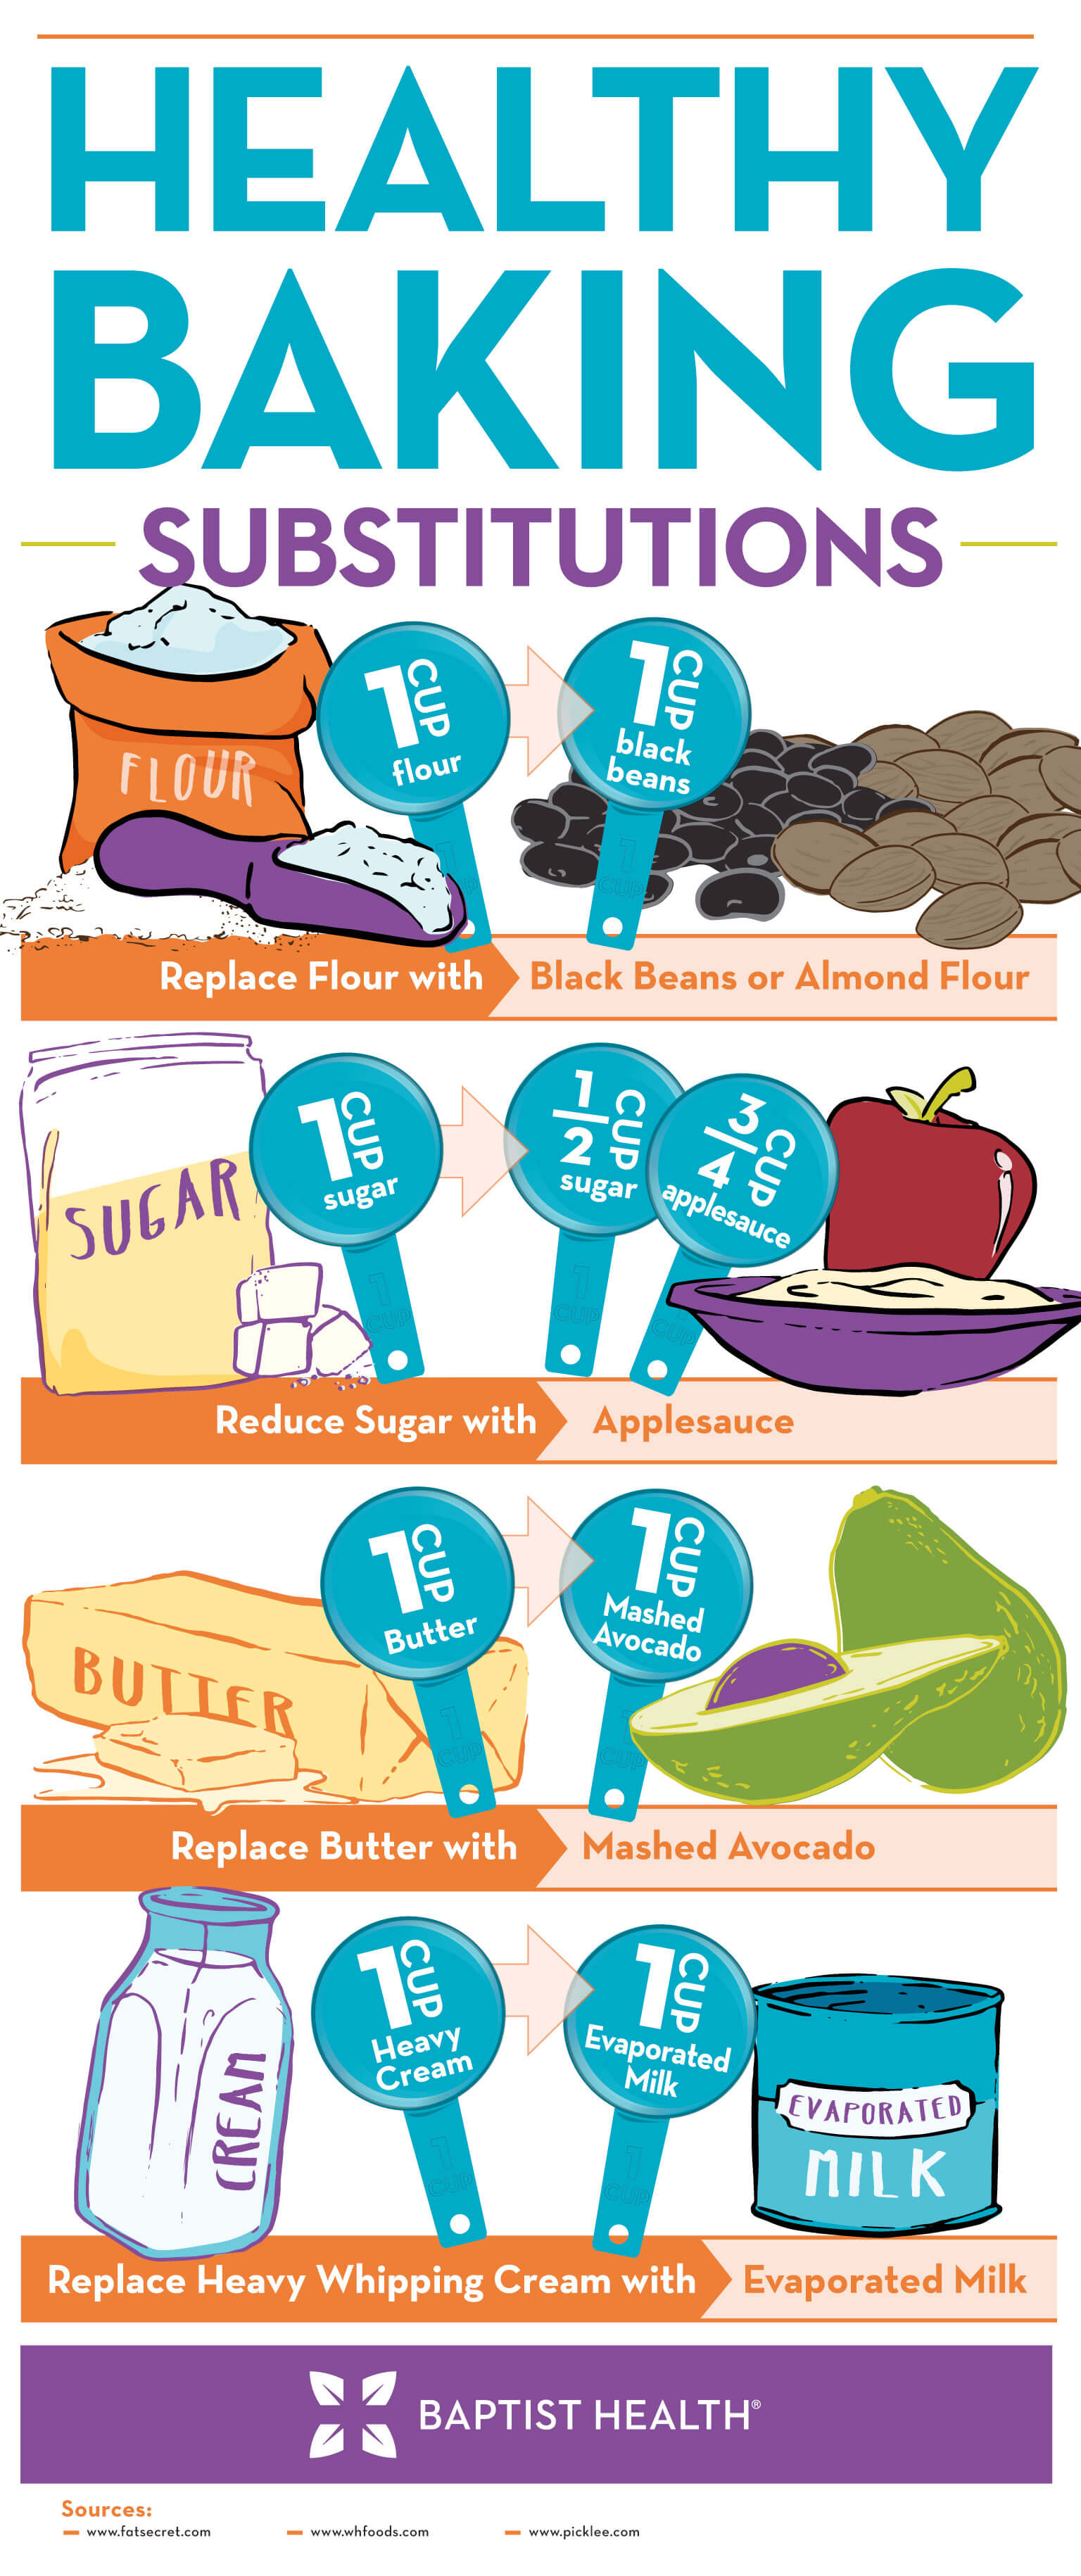 Healthy-Baking-Substitutions-Infographic